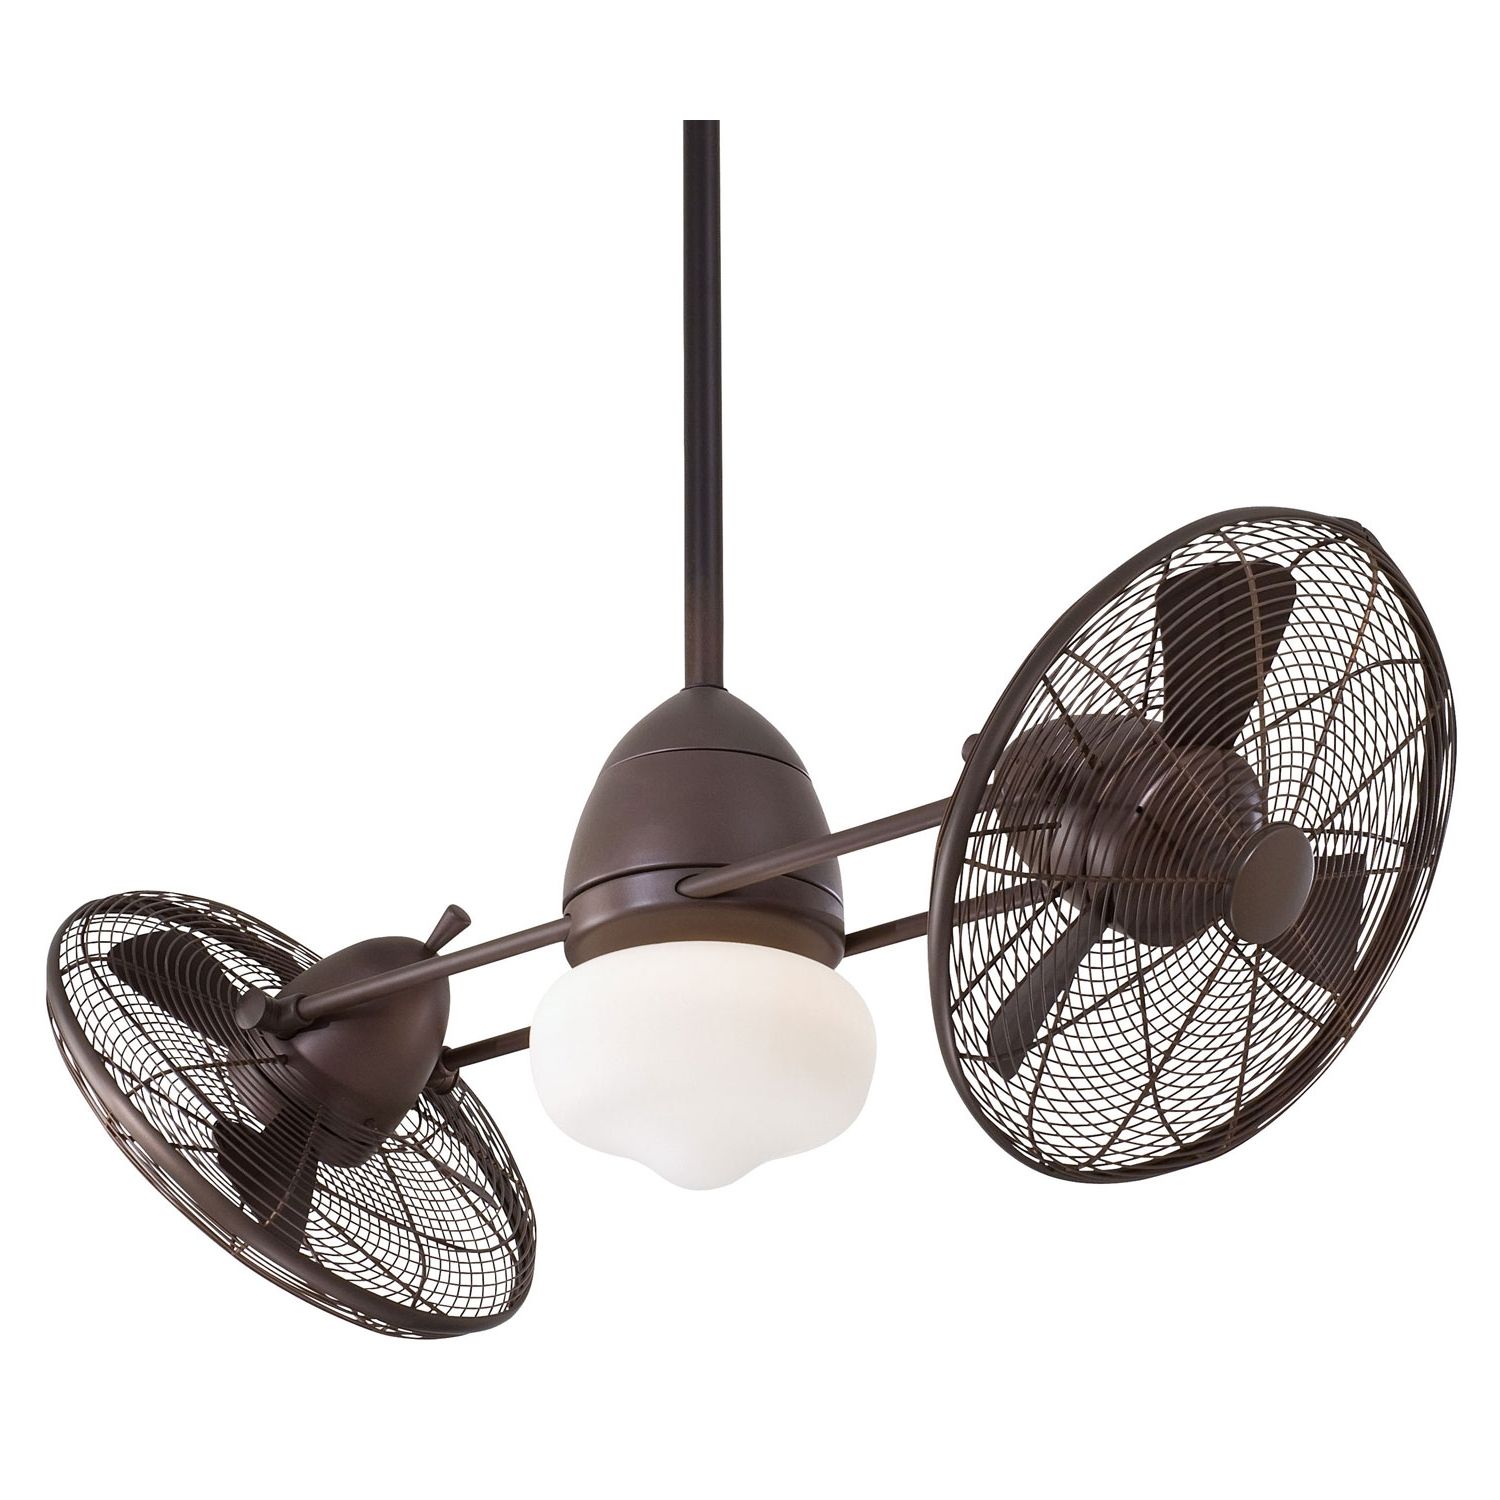 Best And Newest Bronze Outdoor Ceiling Fans With Light With Regard To Minka Aire 42 Inch Gyro Wet Indoor/outdoor Oil Rubbed Bronze Ceiling (View 10 of 20)